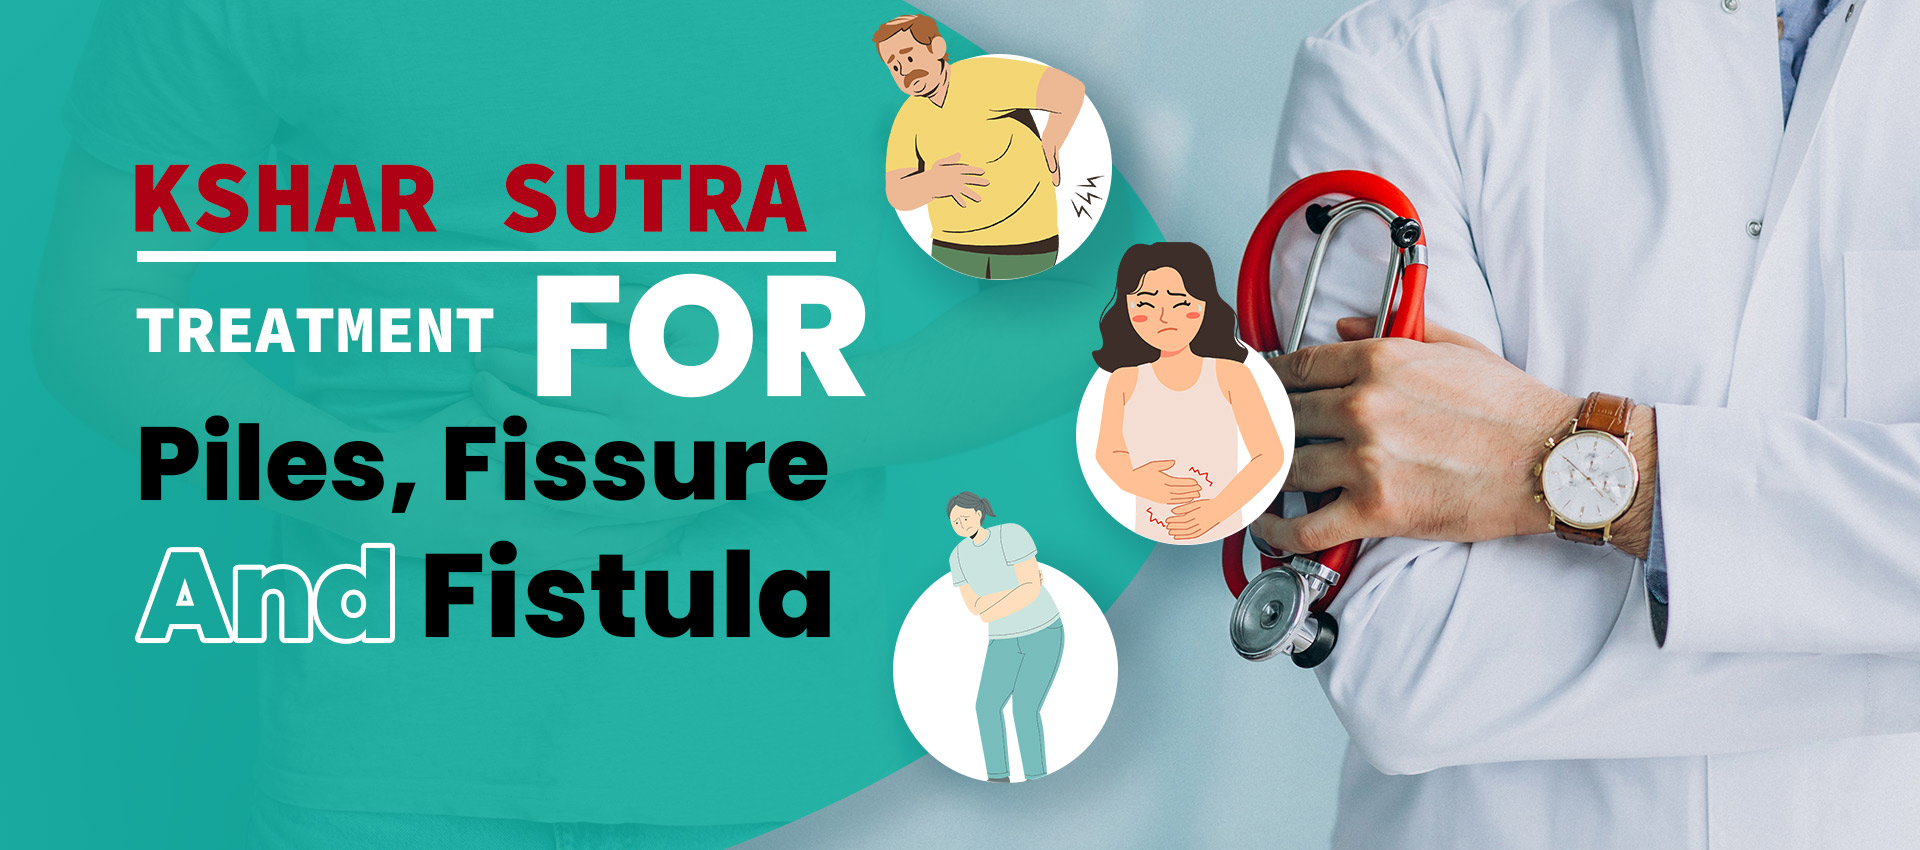 Kshar Sutra Treatment For Piles, Fissure And Fistula